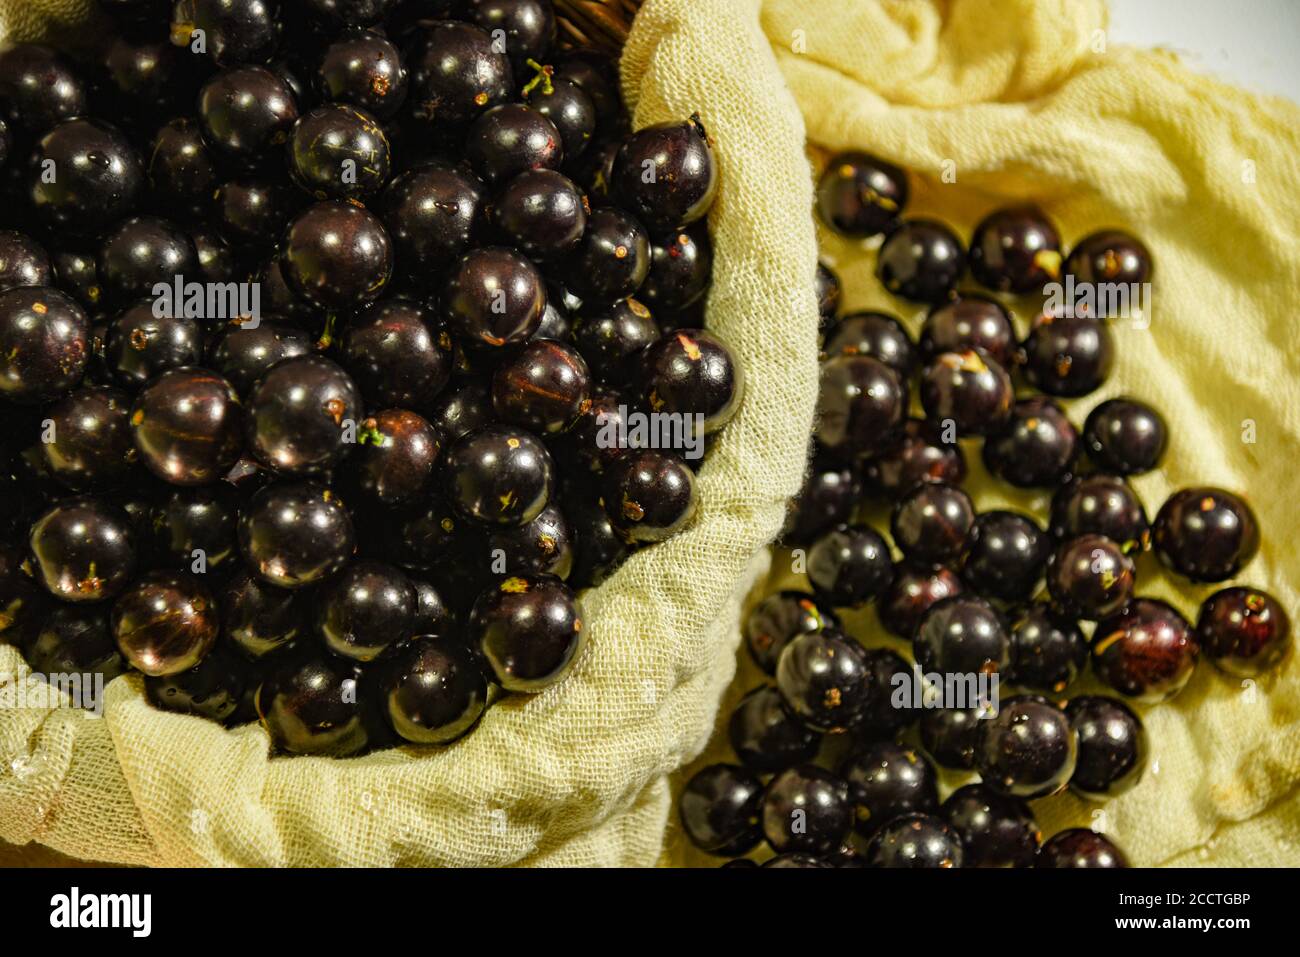 Jabuticaba is Brazilian fruit native to the Atlantic Forest. It has few calories and carbohydrates and is rich in nutrients like vitamin C, E, magnesi Stock Photo